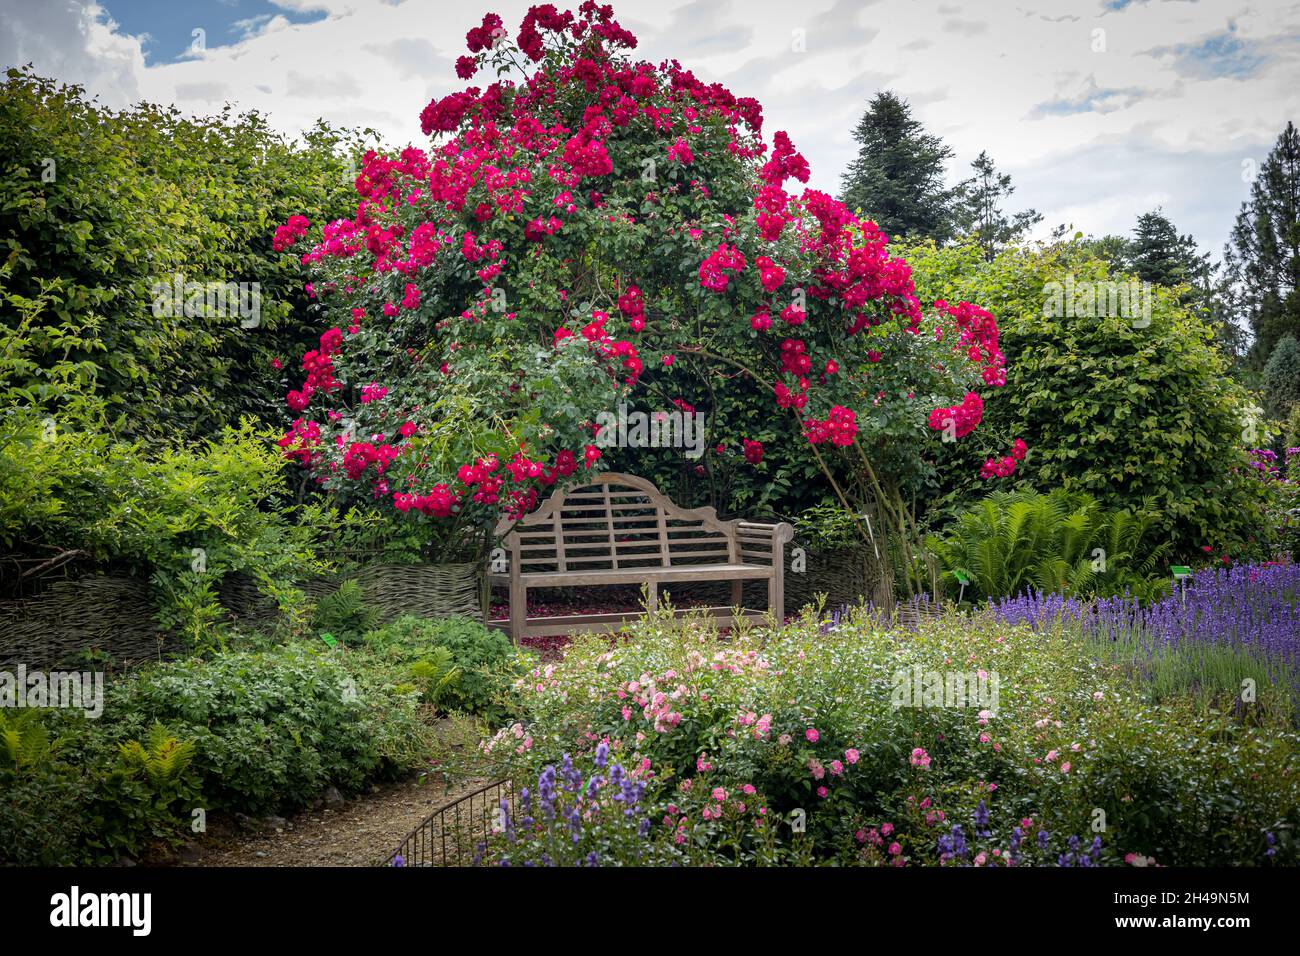 WOJSLAWICE, POLAND - July 9, 2021: A wooden bench in the garden, surrounded by climbing roses, green trees and blooming lavender flowers. Stock Photo